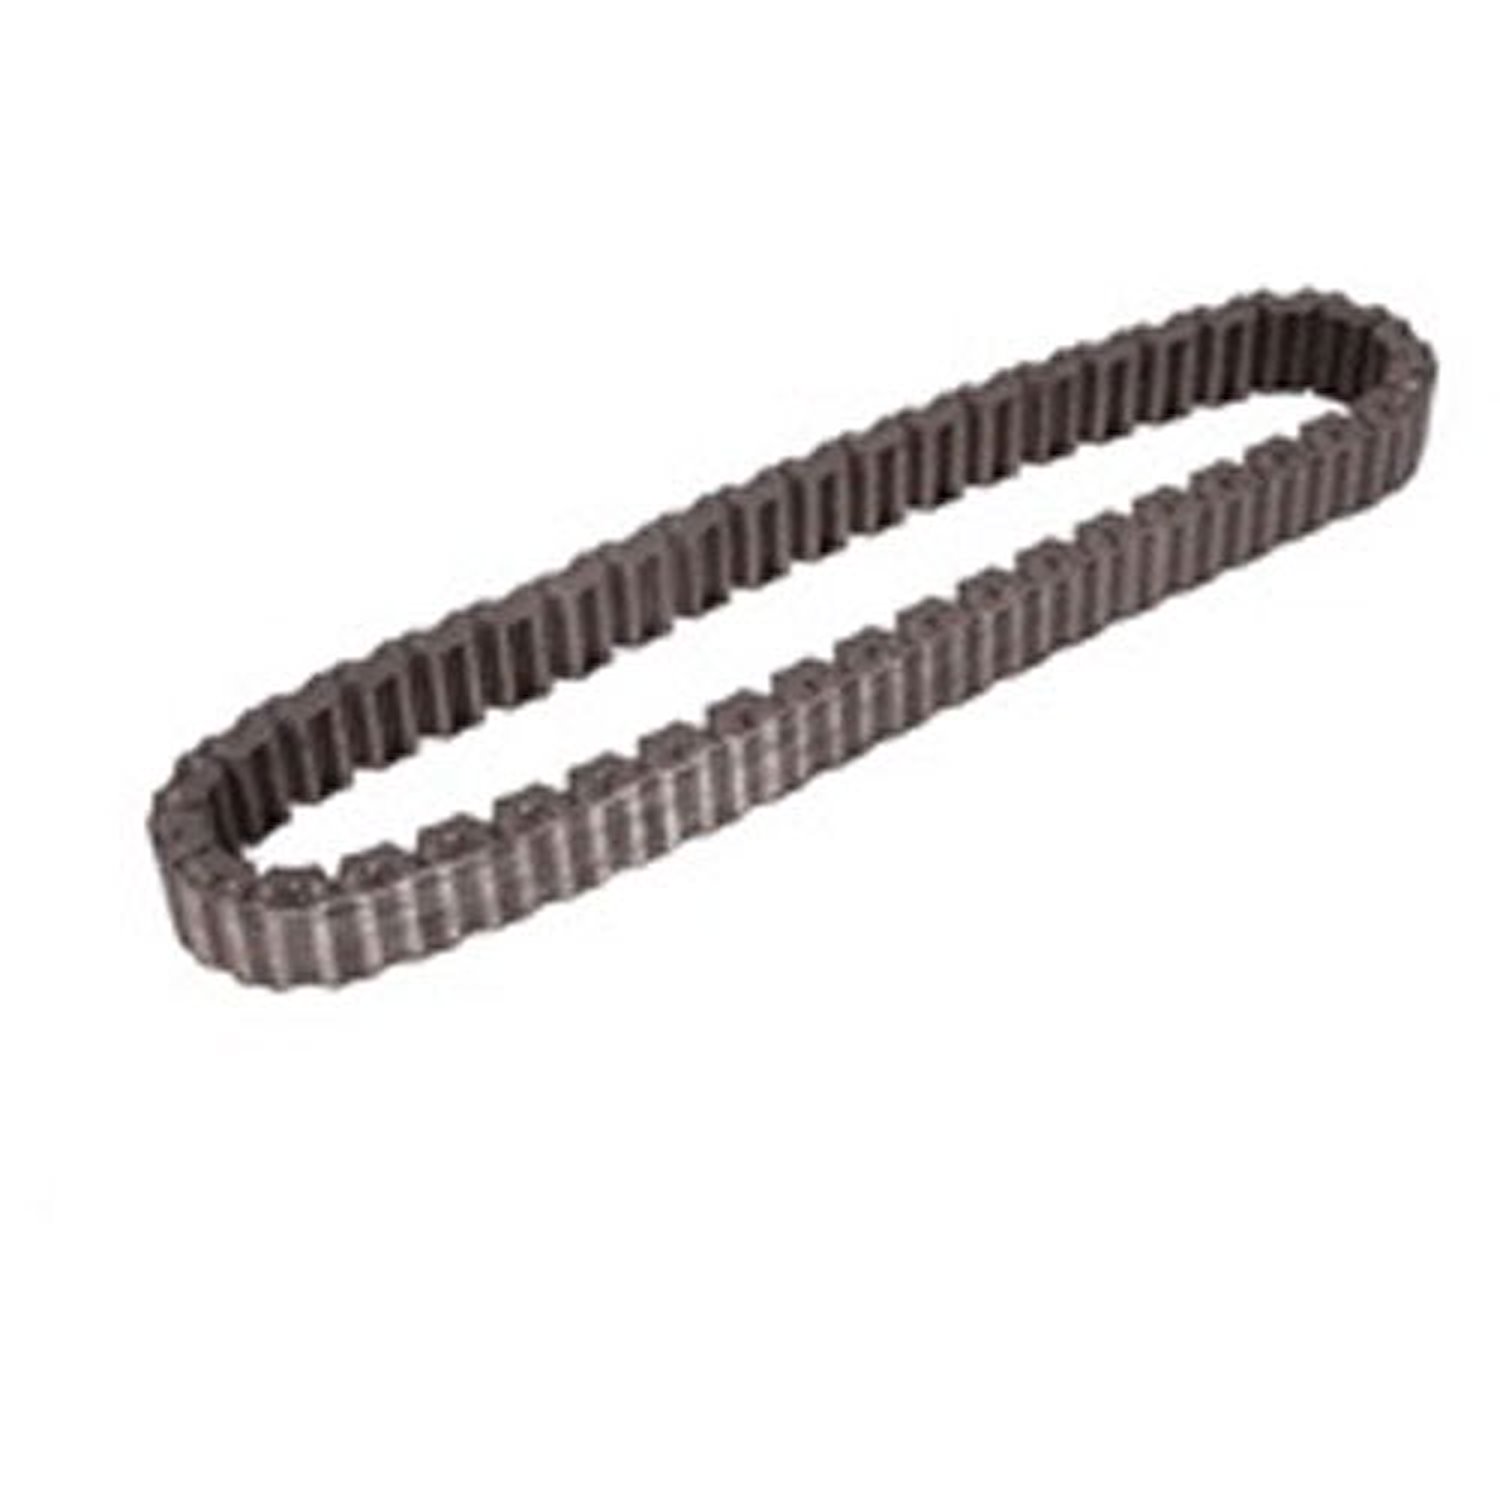 Replacement transfer case chain from Omix-ADA, Fits NV241 transfer cases in 07-16 Jeep Wrang